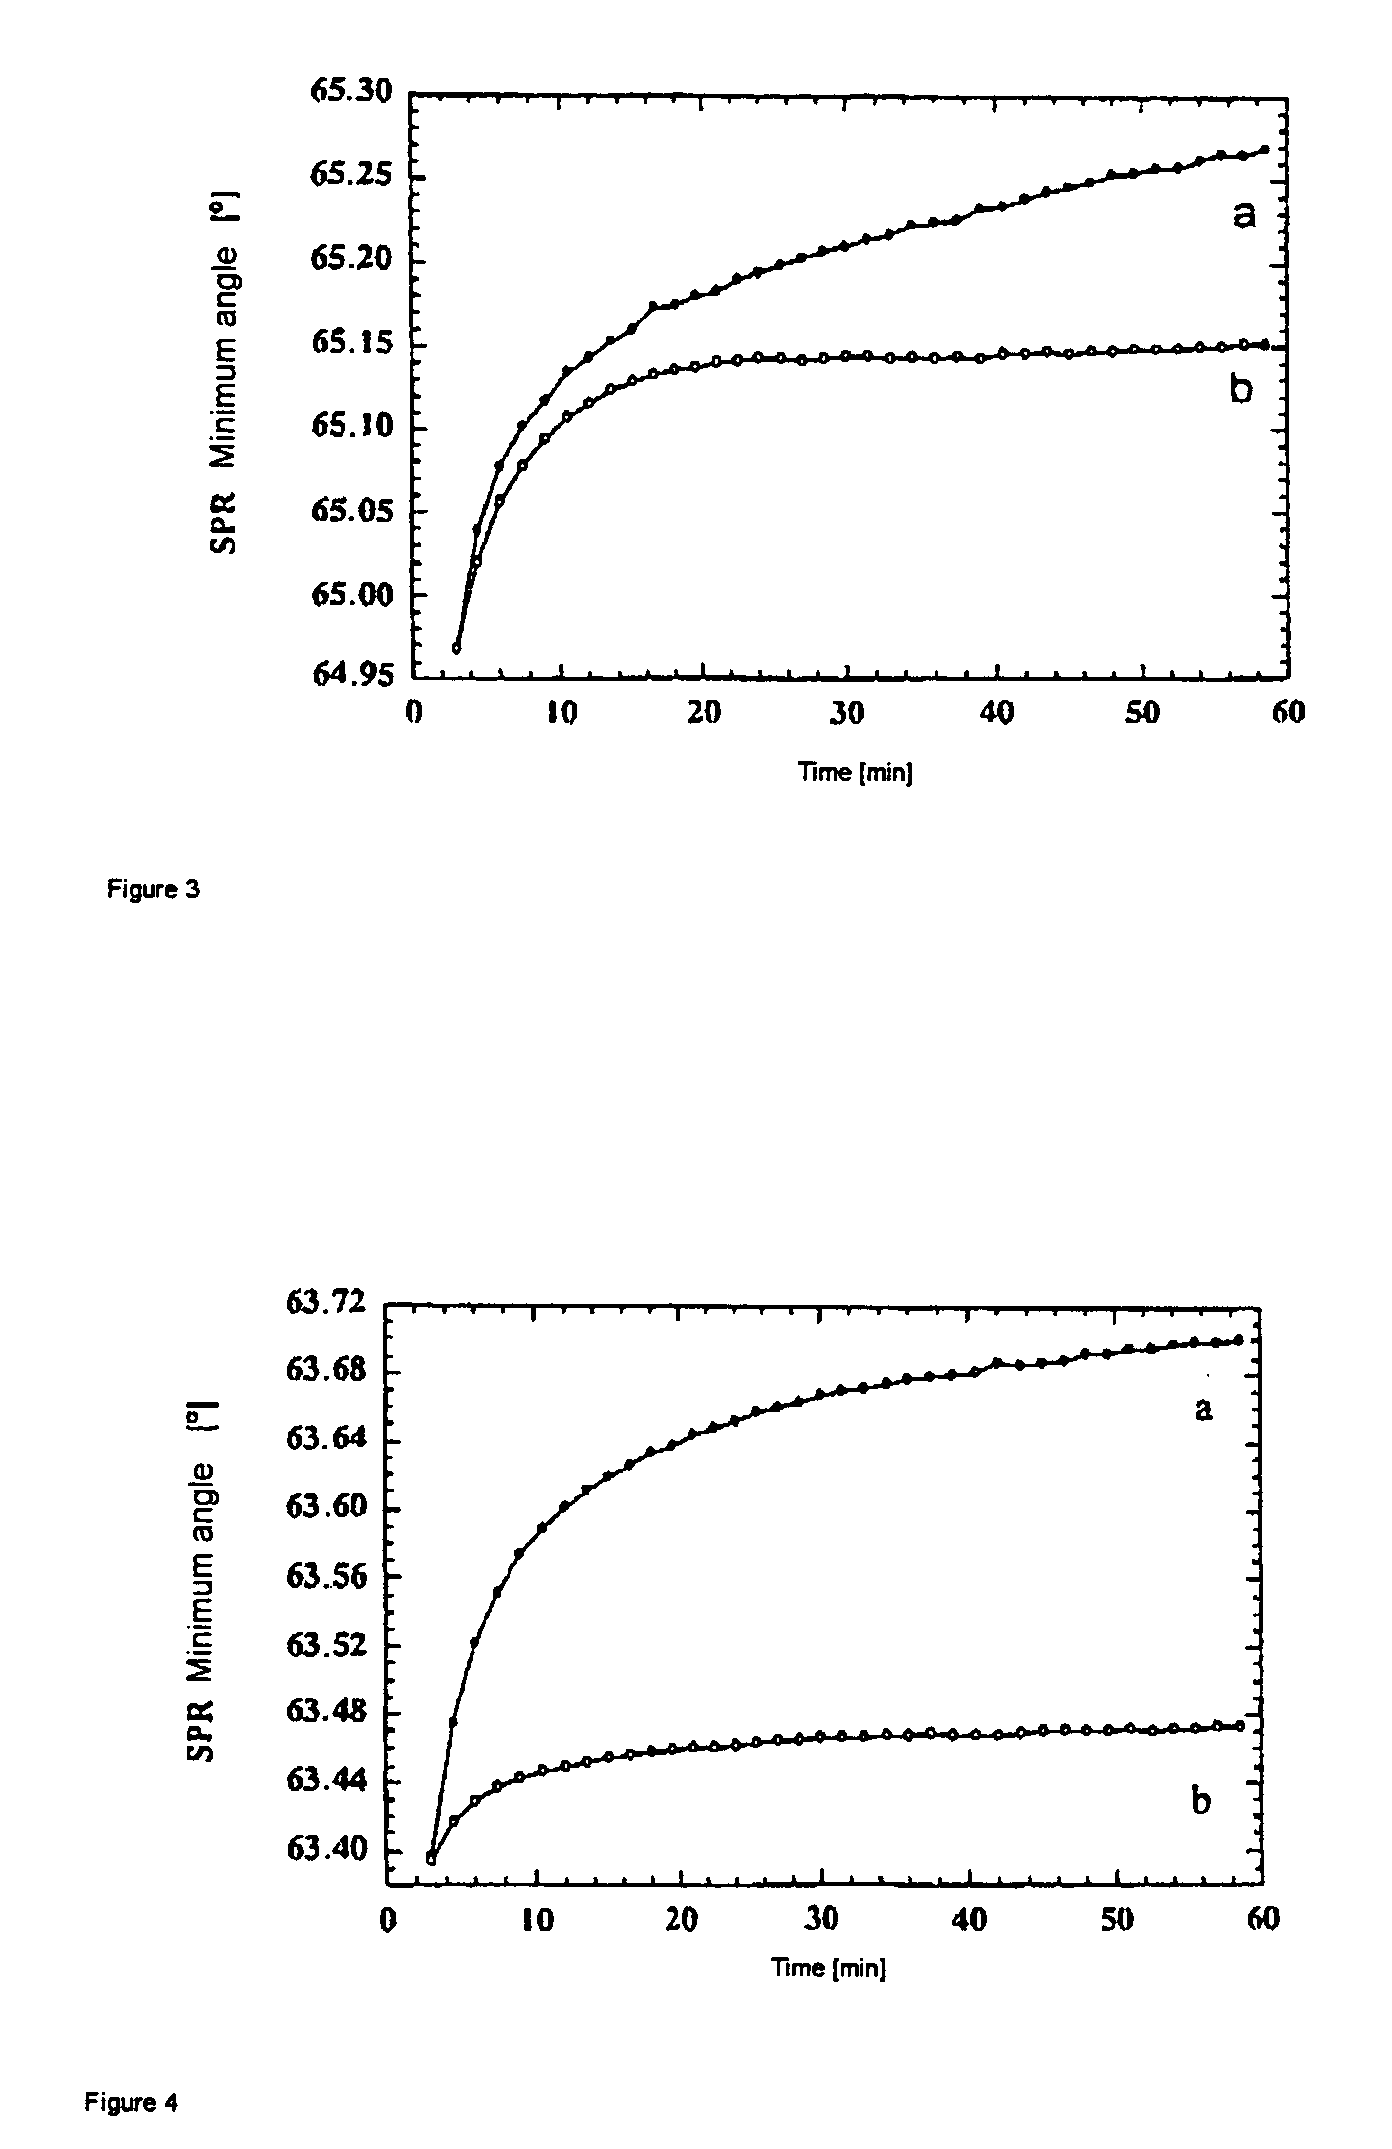 Surfaces comprising a hydrophilic spacer, covalently bonded to hydrogels